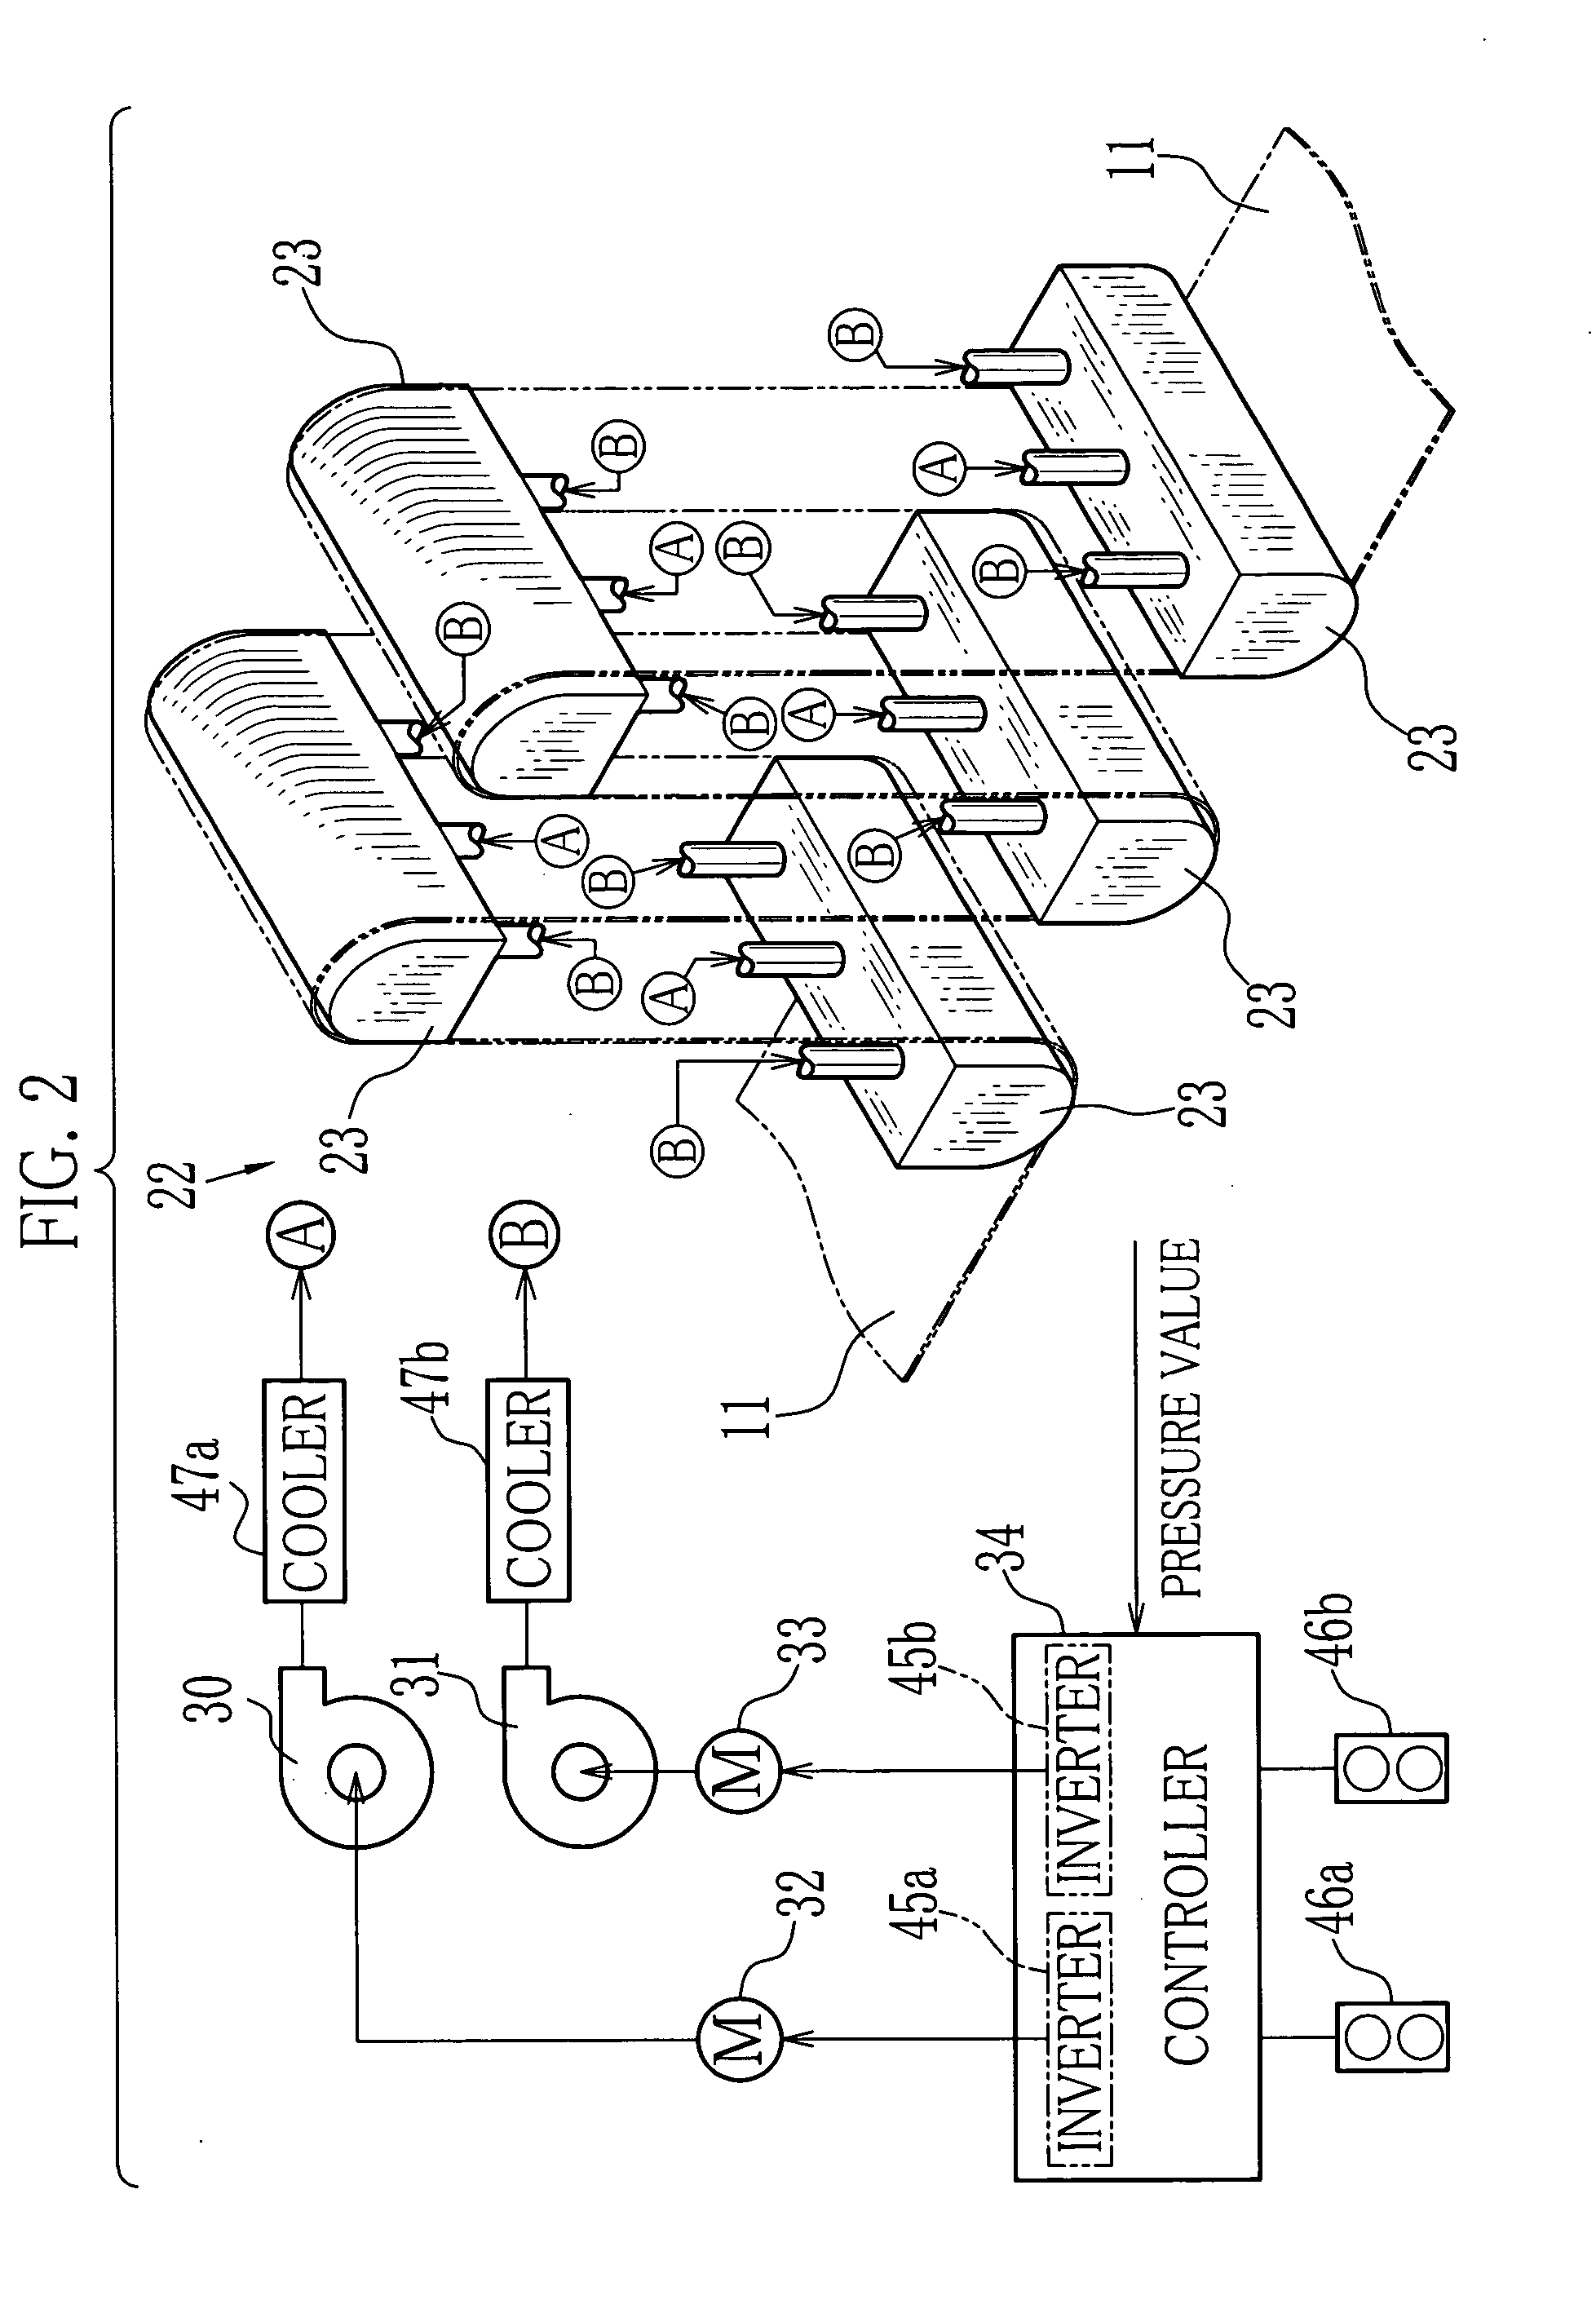 Noncontact web transporting method and apparatus